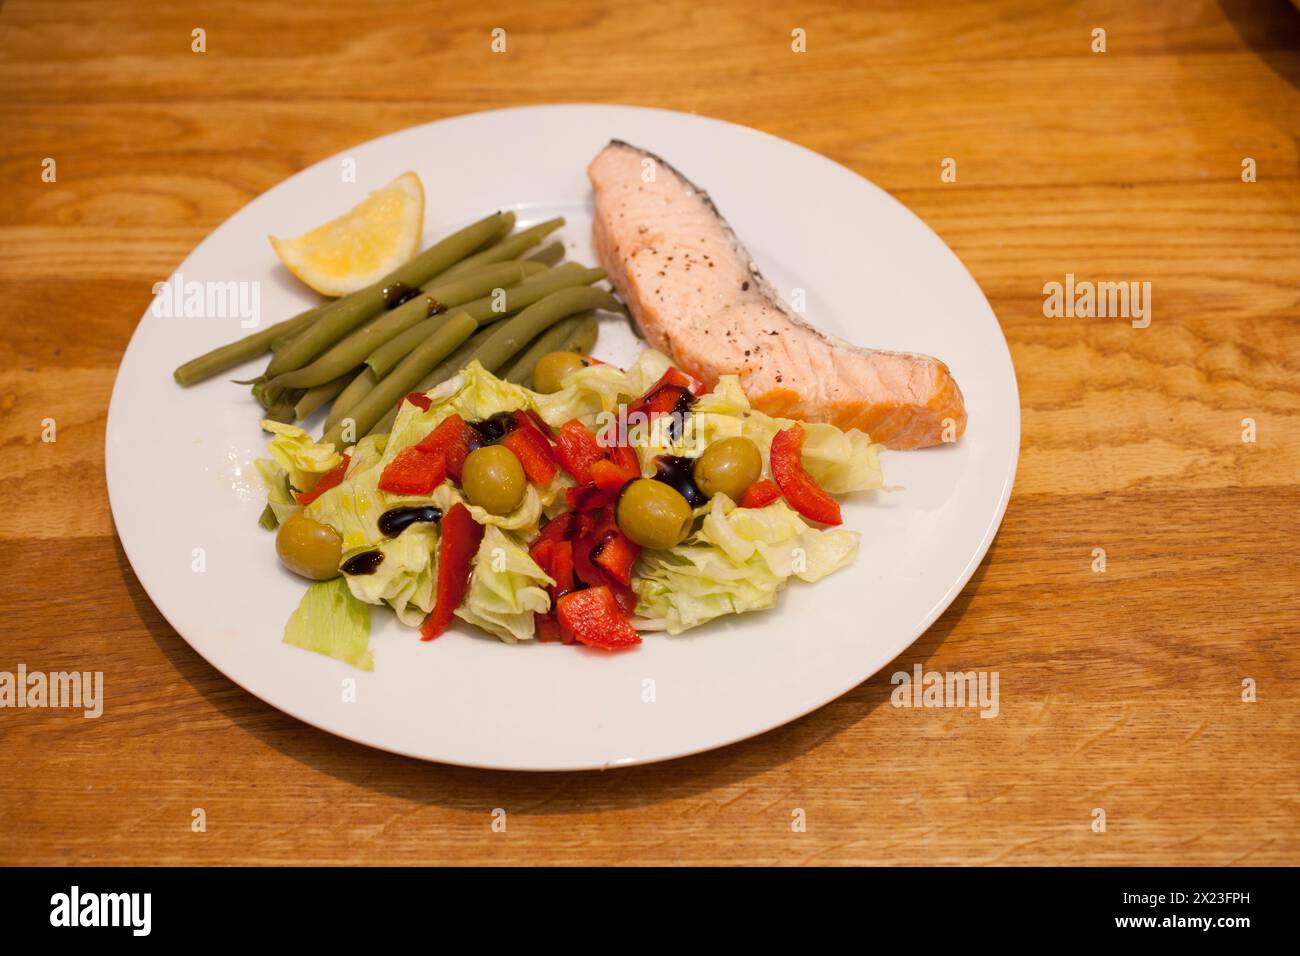 A dish of poached salmon, green beans and a fresh salad with red peppers and olives Stock Photo